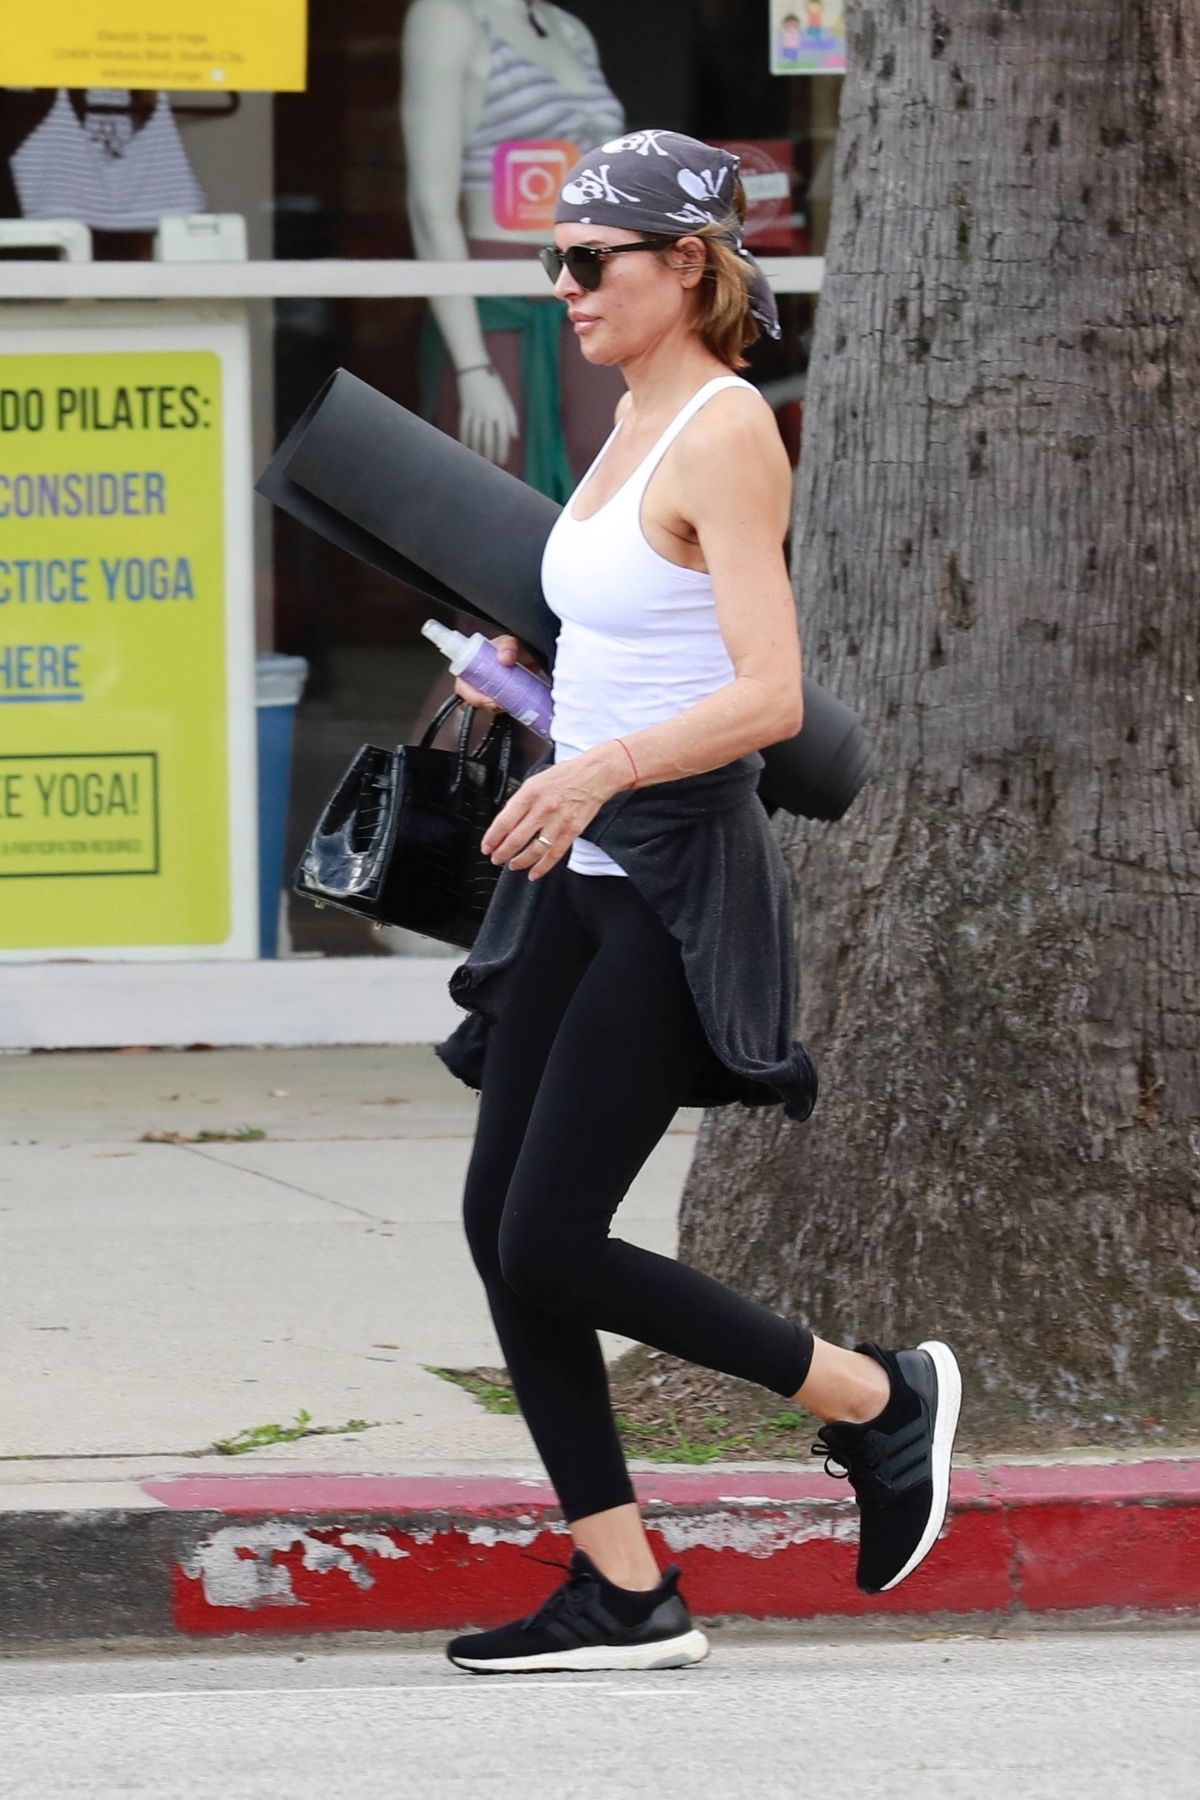 Lisa Rinna trades in the leggings for trousers as she transforms from yoga  student to city girl